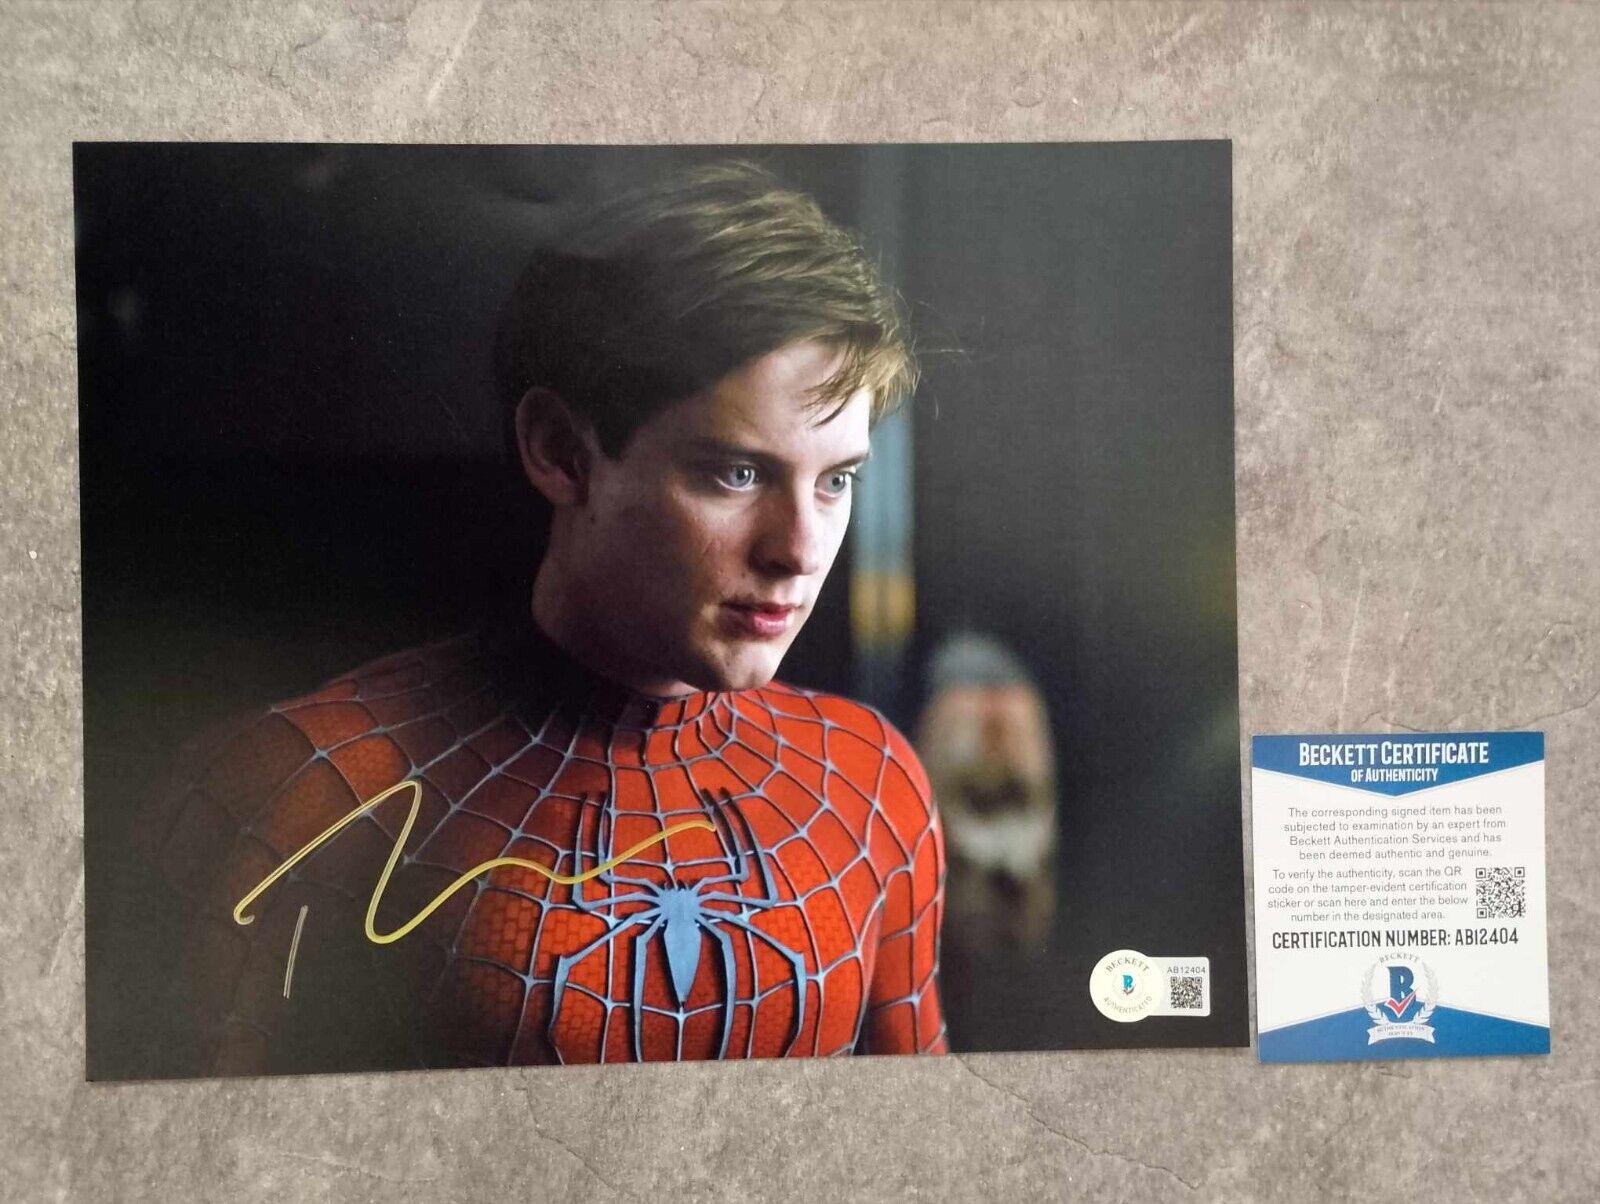 Tobey Maguire Signed Autograph Spider-Man 8x10 Photo Beckett COA